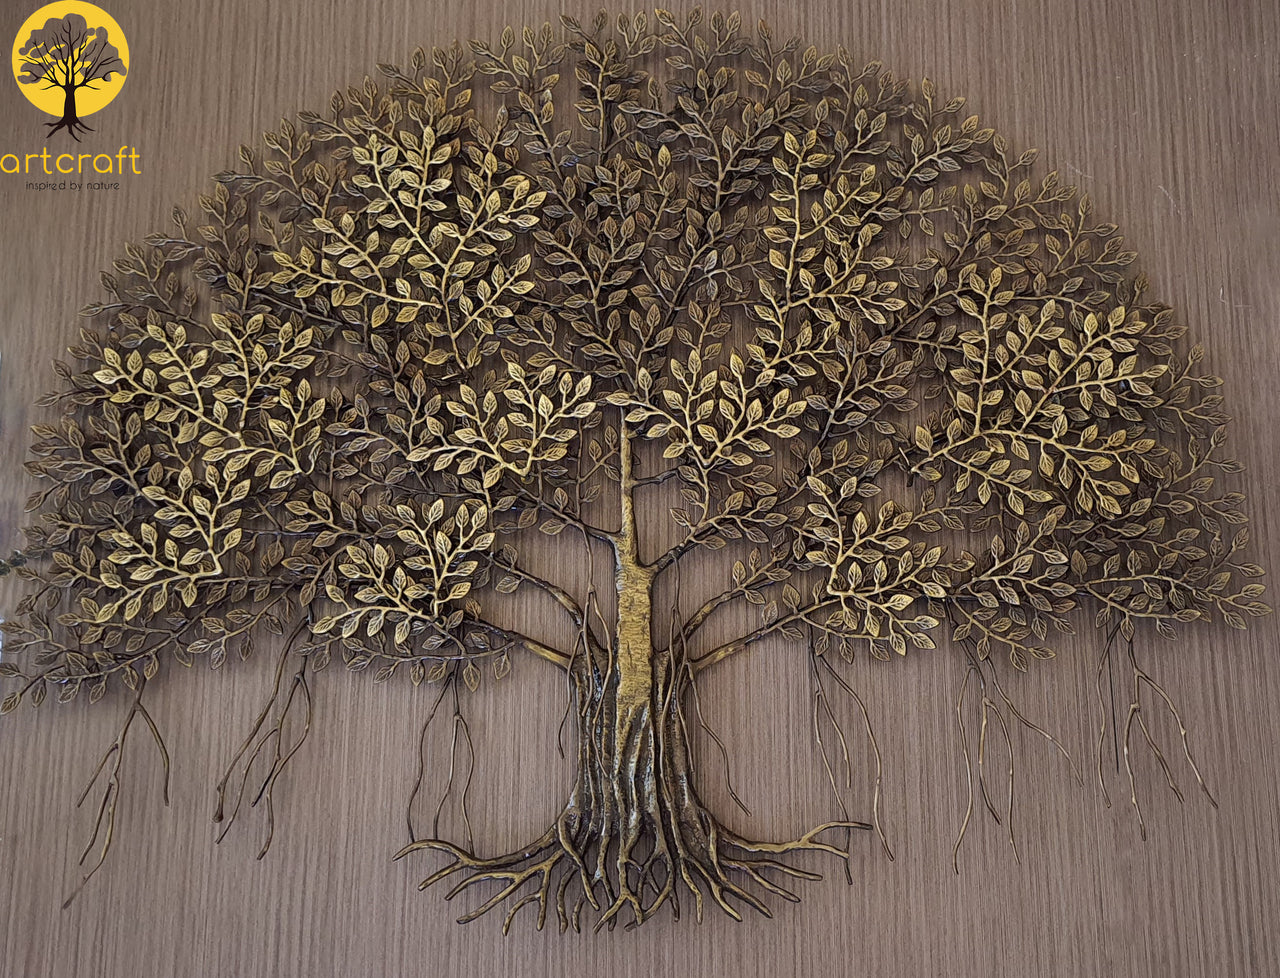 Banyan Tree - 100% MADE FROM BRASS